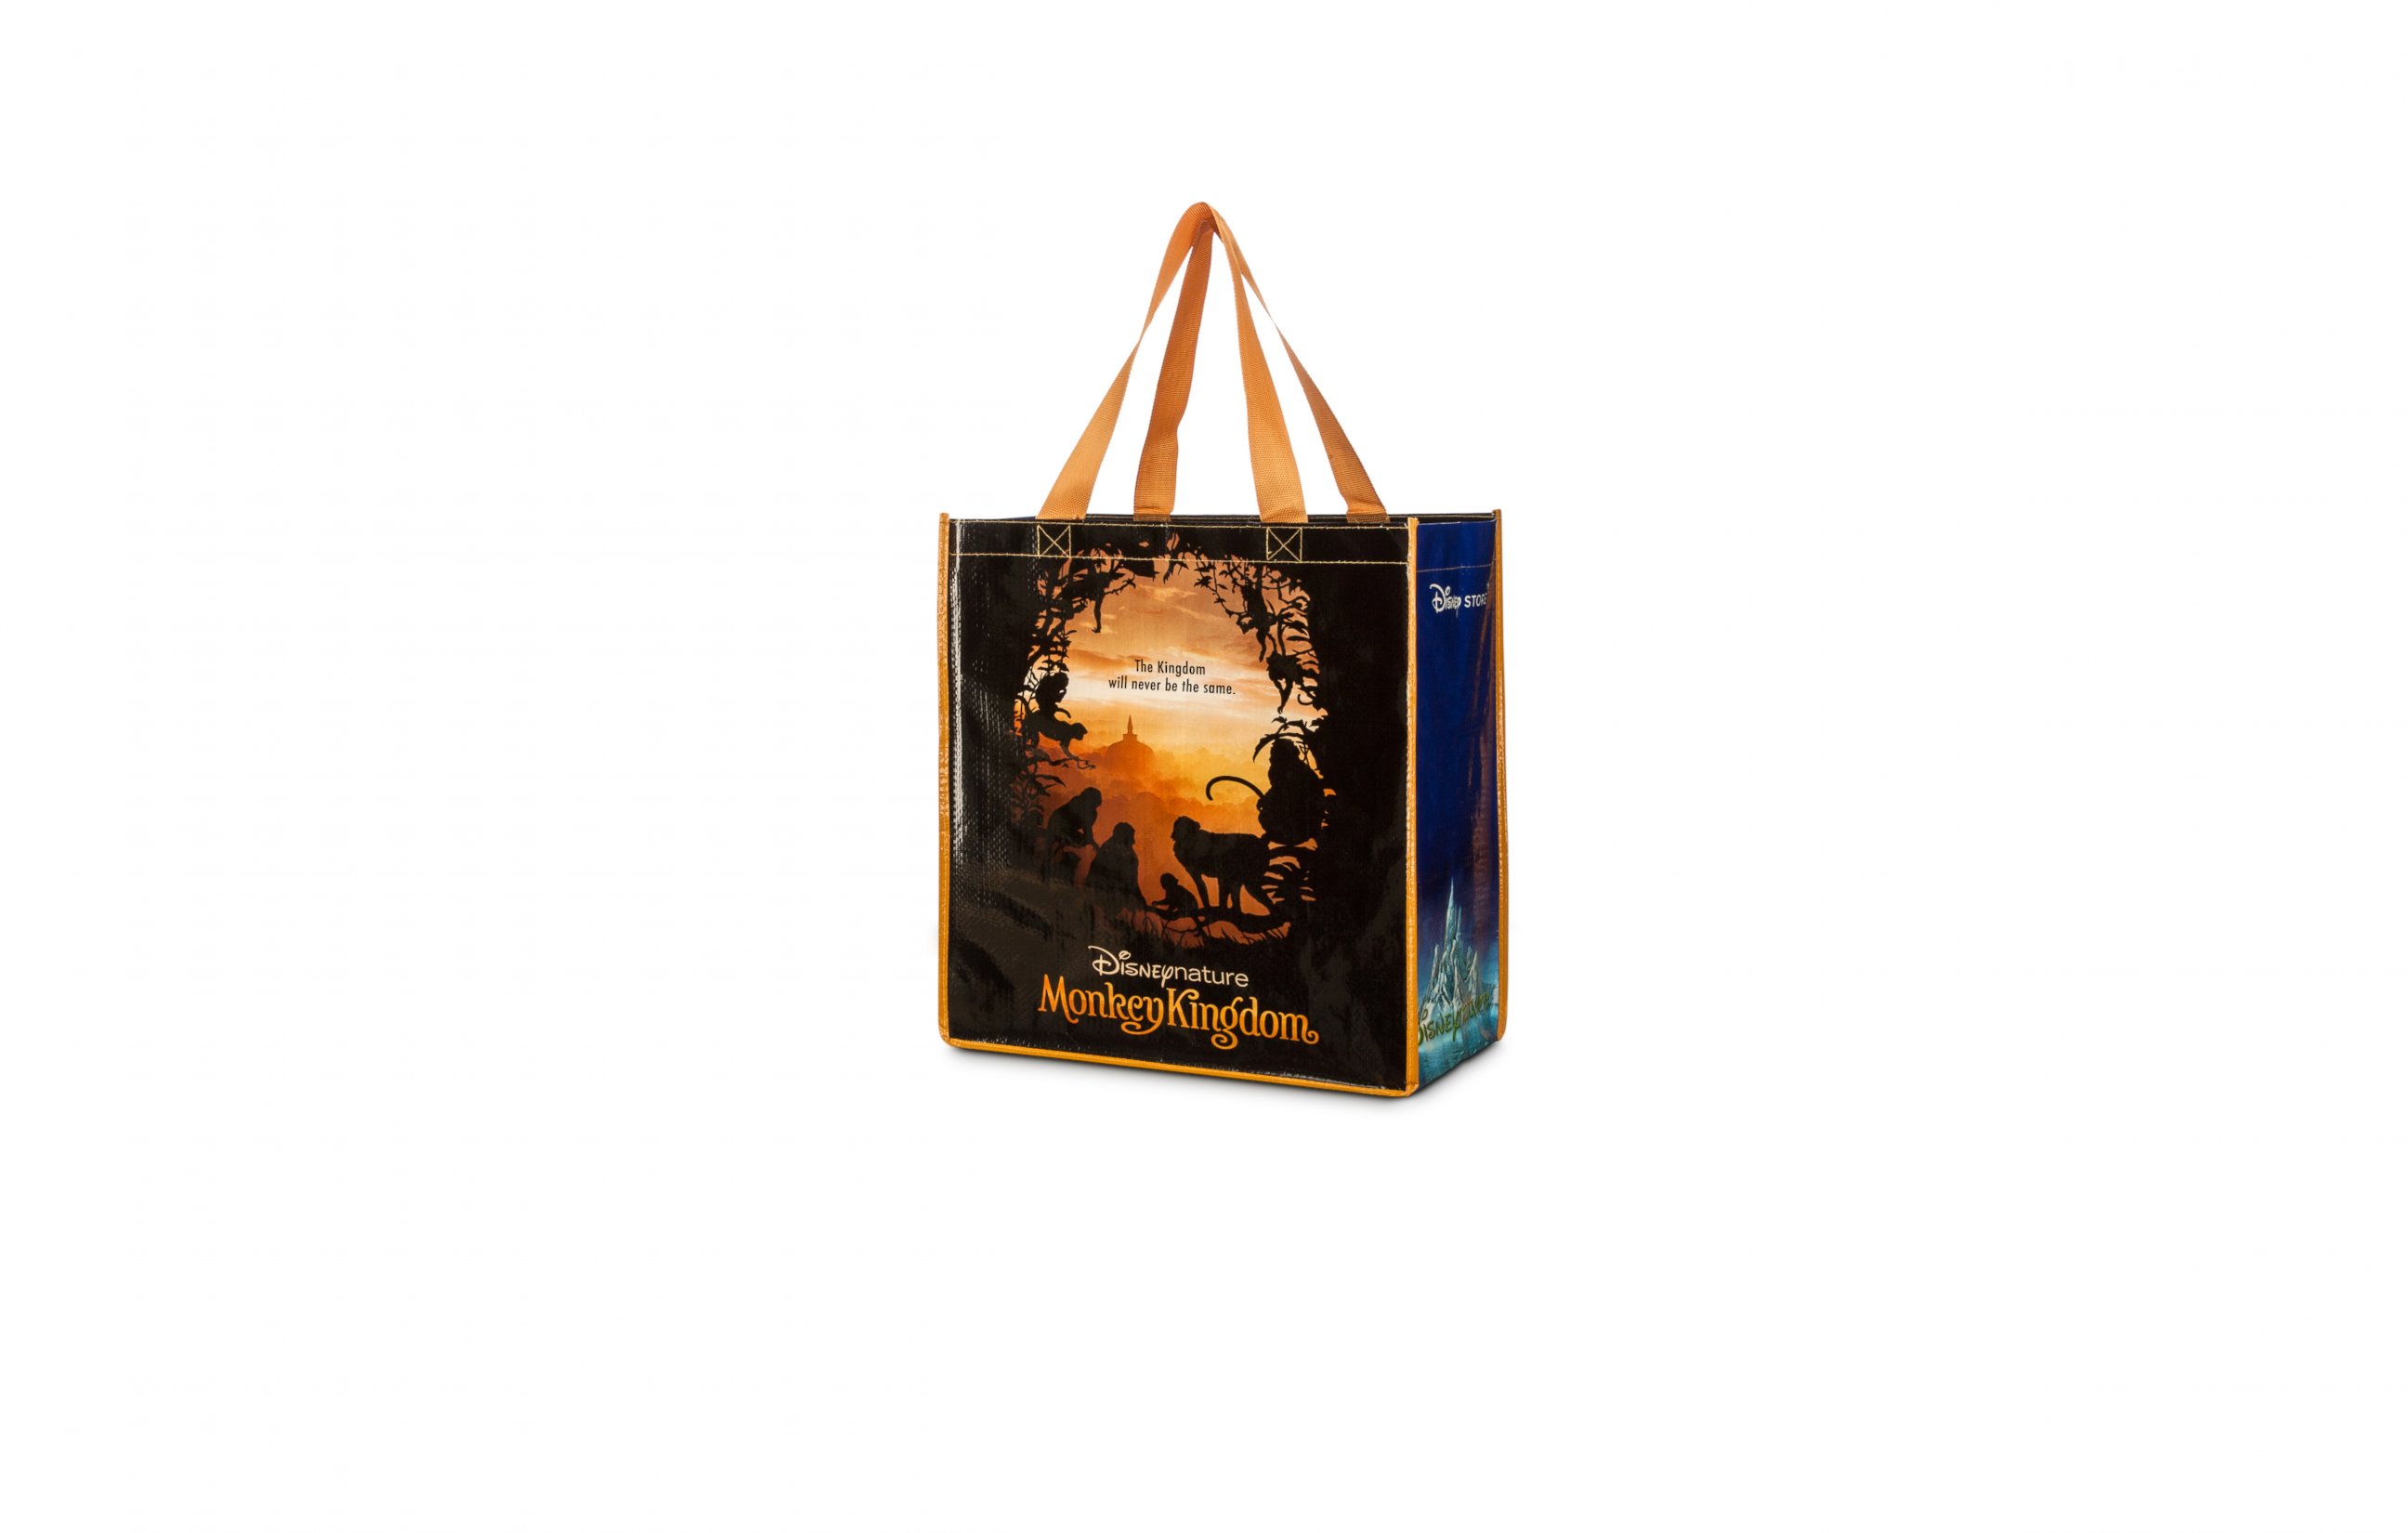 PHOTO: On 2015 Earth Day, April 22, Disney Stores are offering a free "Disneynature Monkey Kingdom" reusable tote bag with any purchase, while supplies last. 